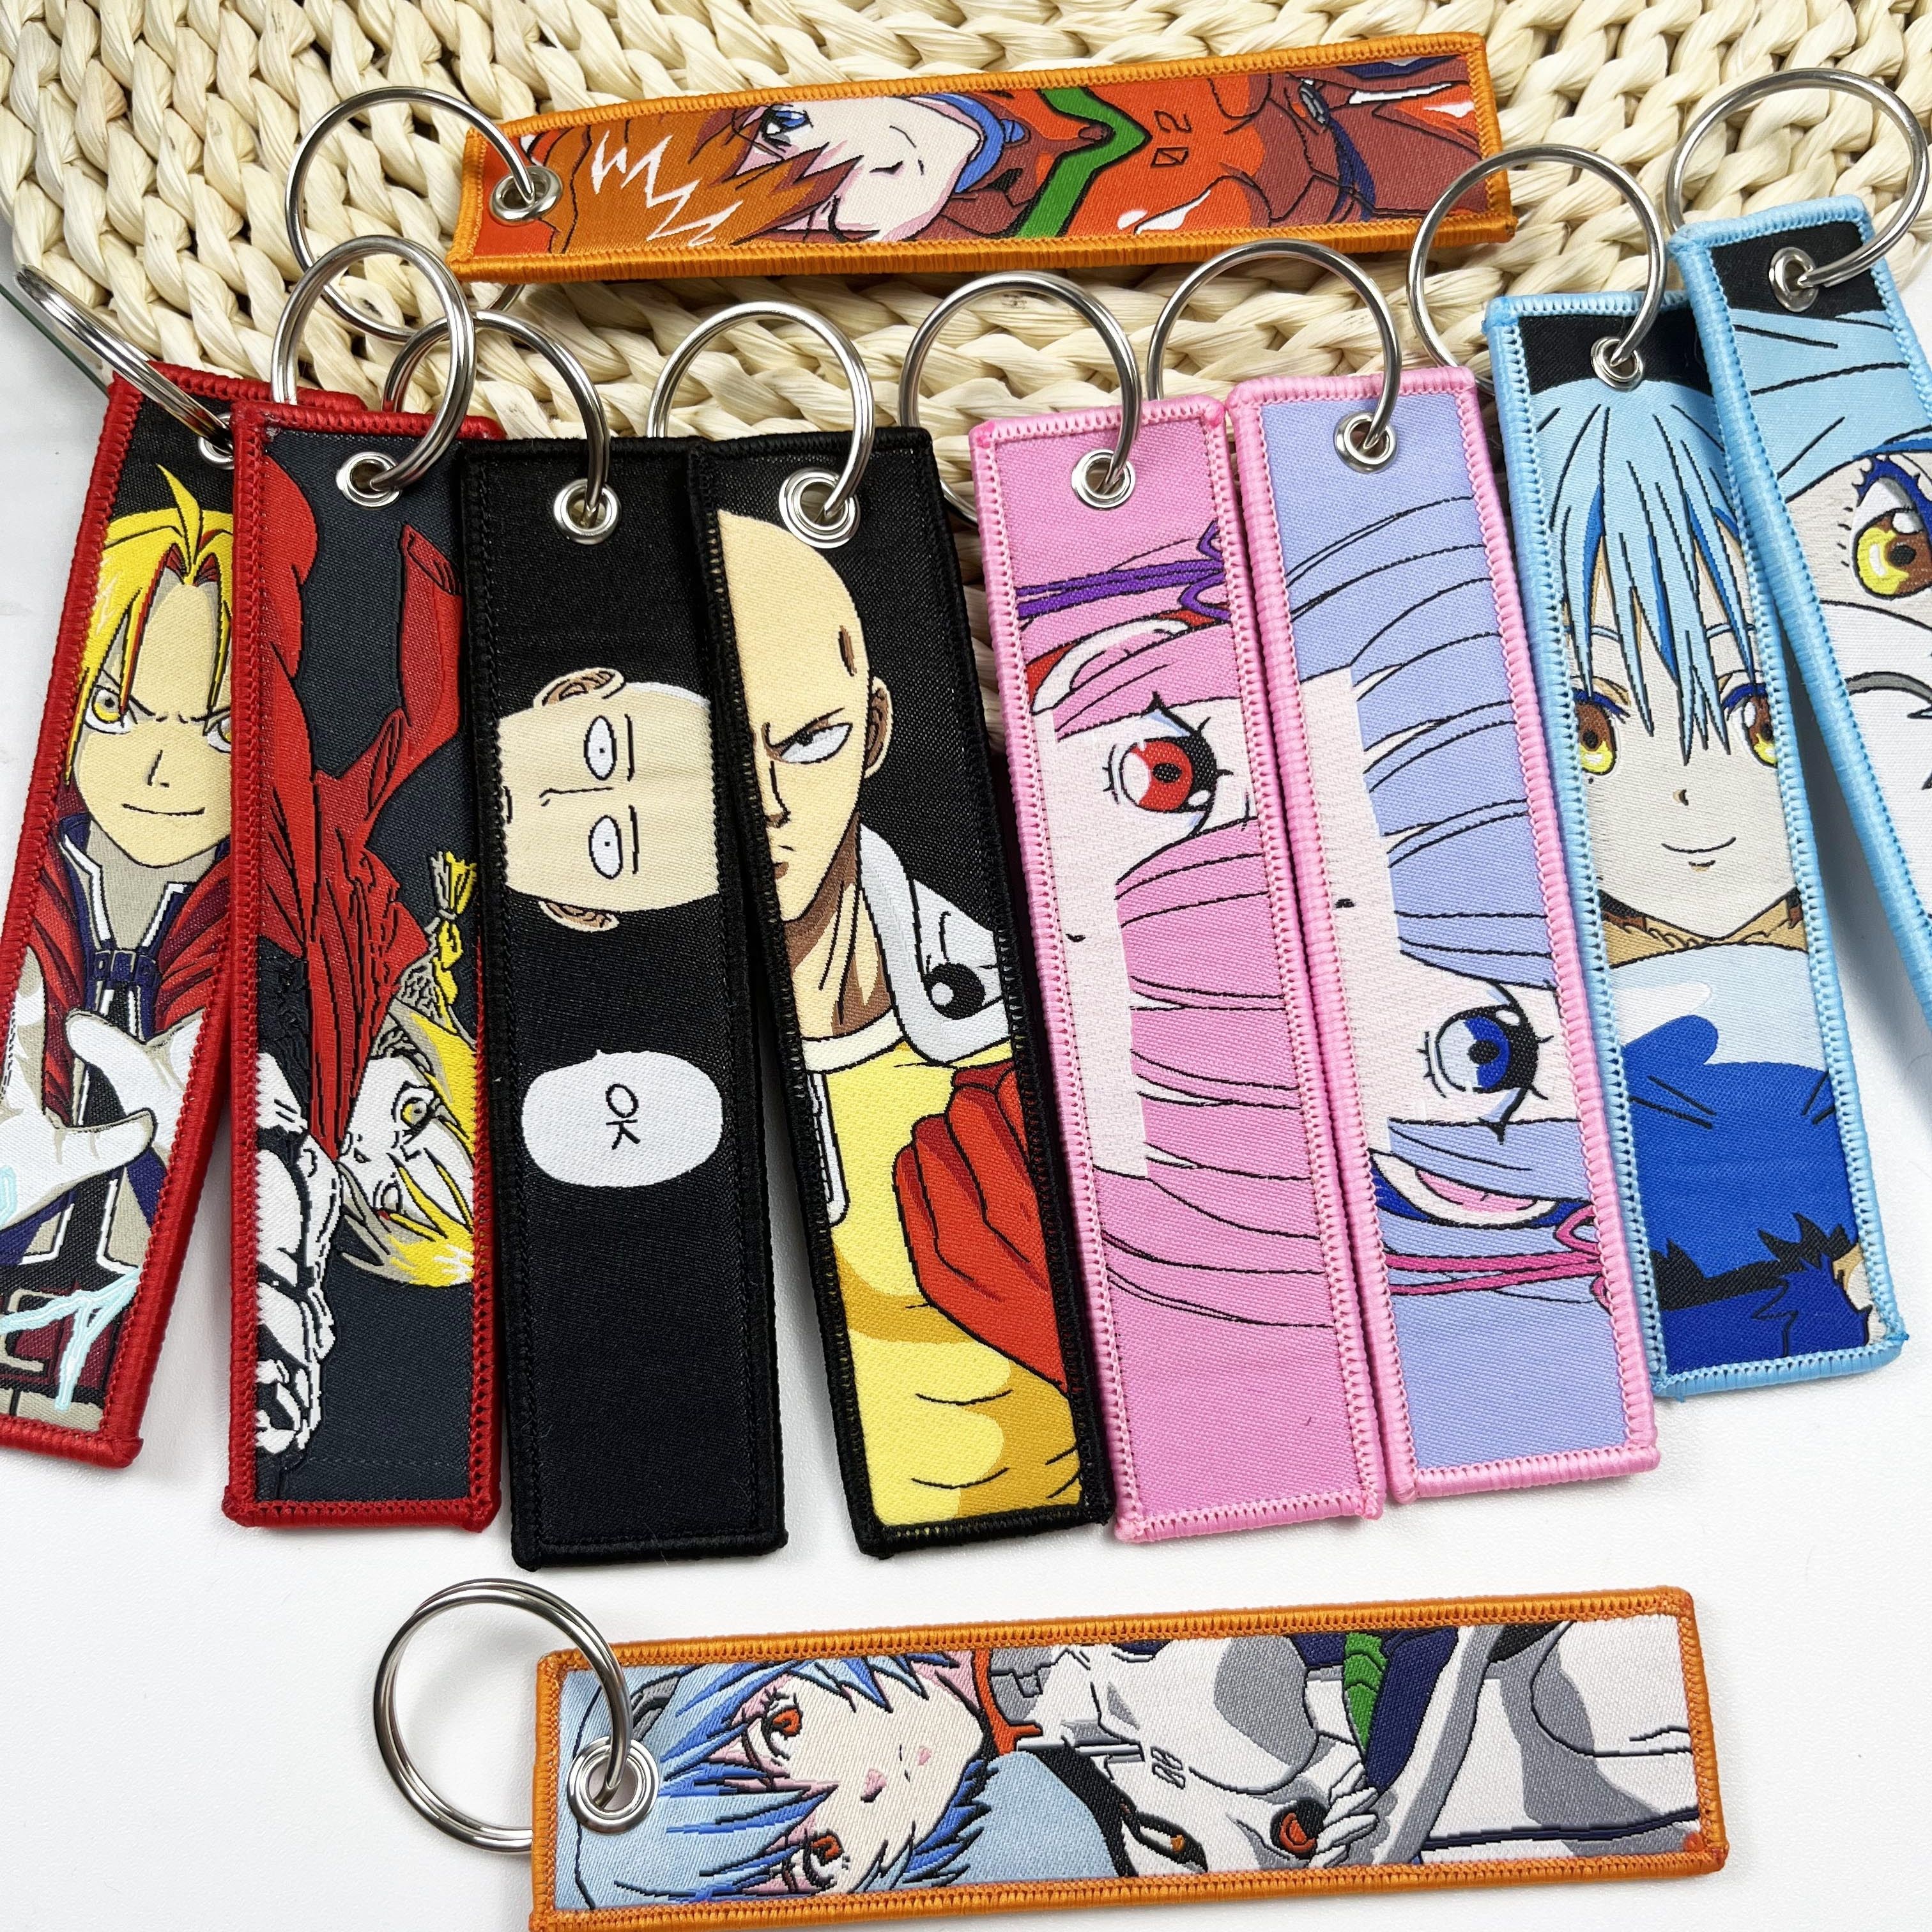 Anime Keychain Pack +40 Models Keychain and Pins